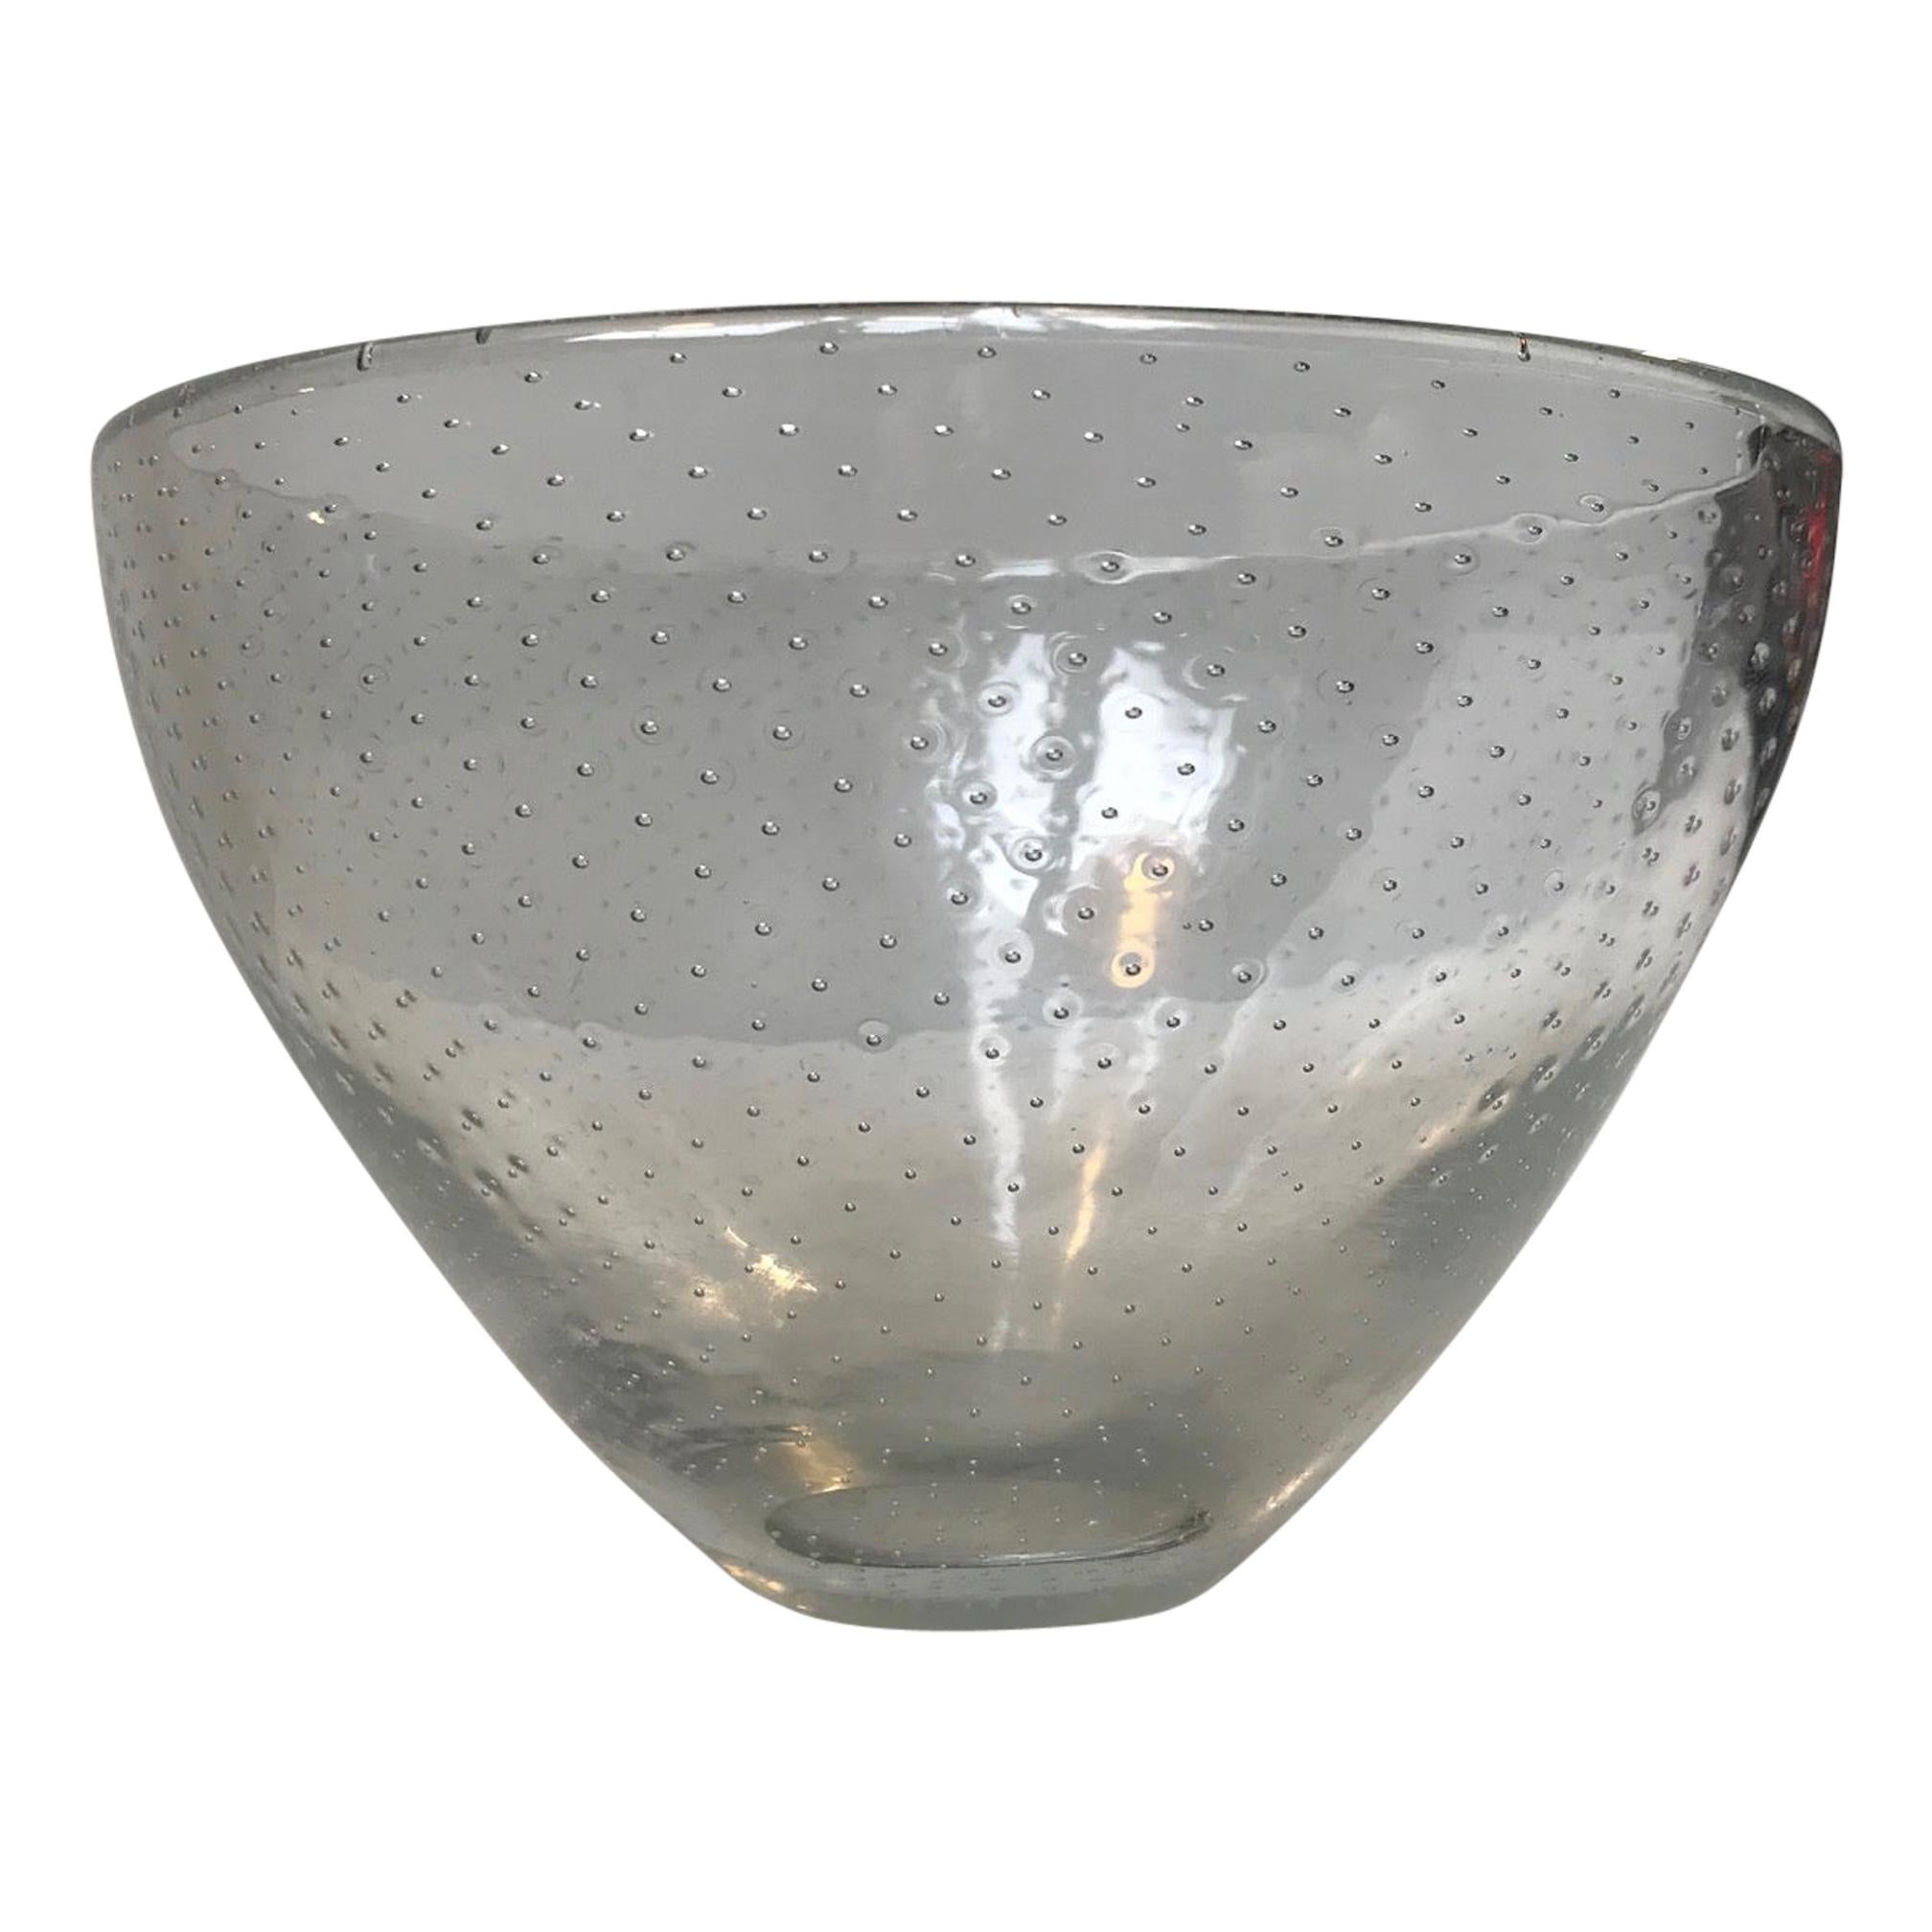 Gunnel Nyman Glass Bowl with Air Bubbles, Finland, 1940s For Sale